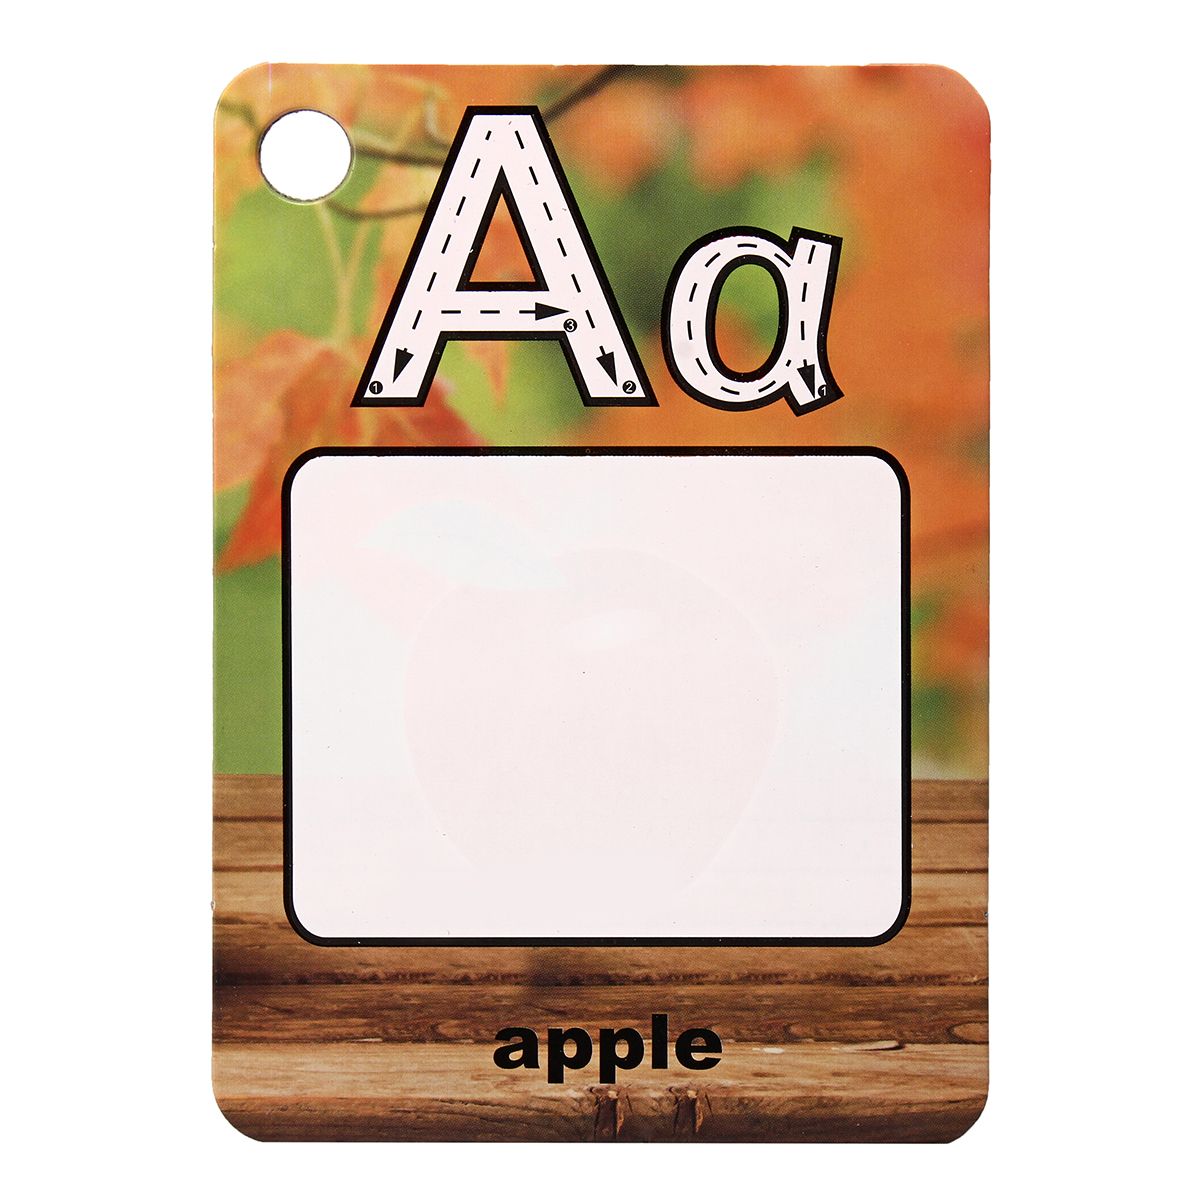 AlphabetNumber-Kids-Magic-Water-Drawing-Flash-Card-Kids-Preschool-Education-Learning-Picture-Science-1448249